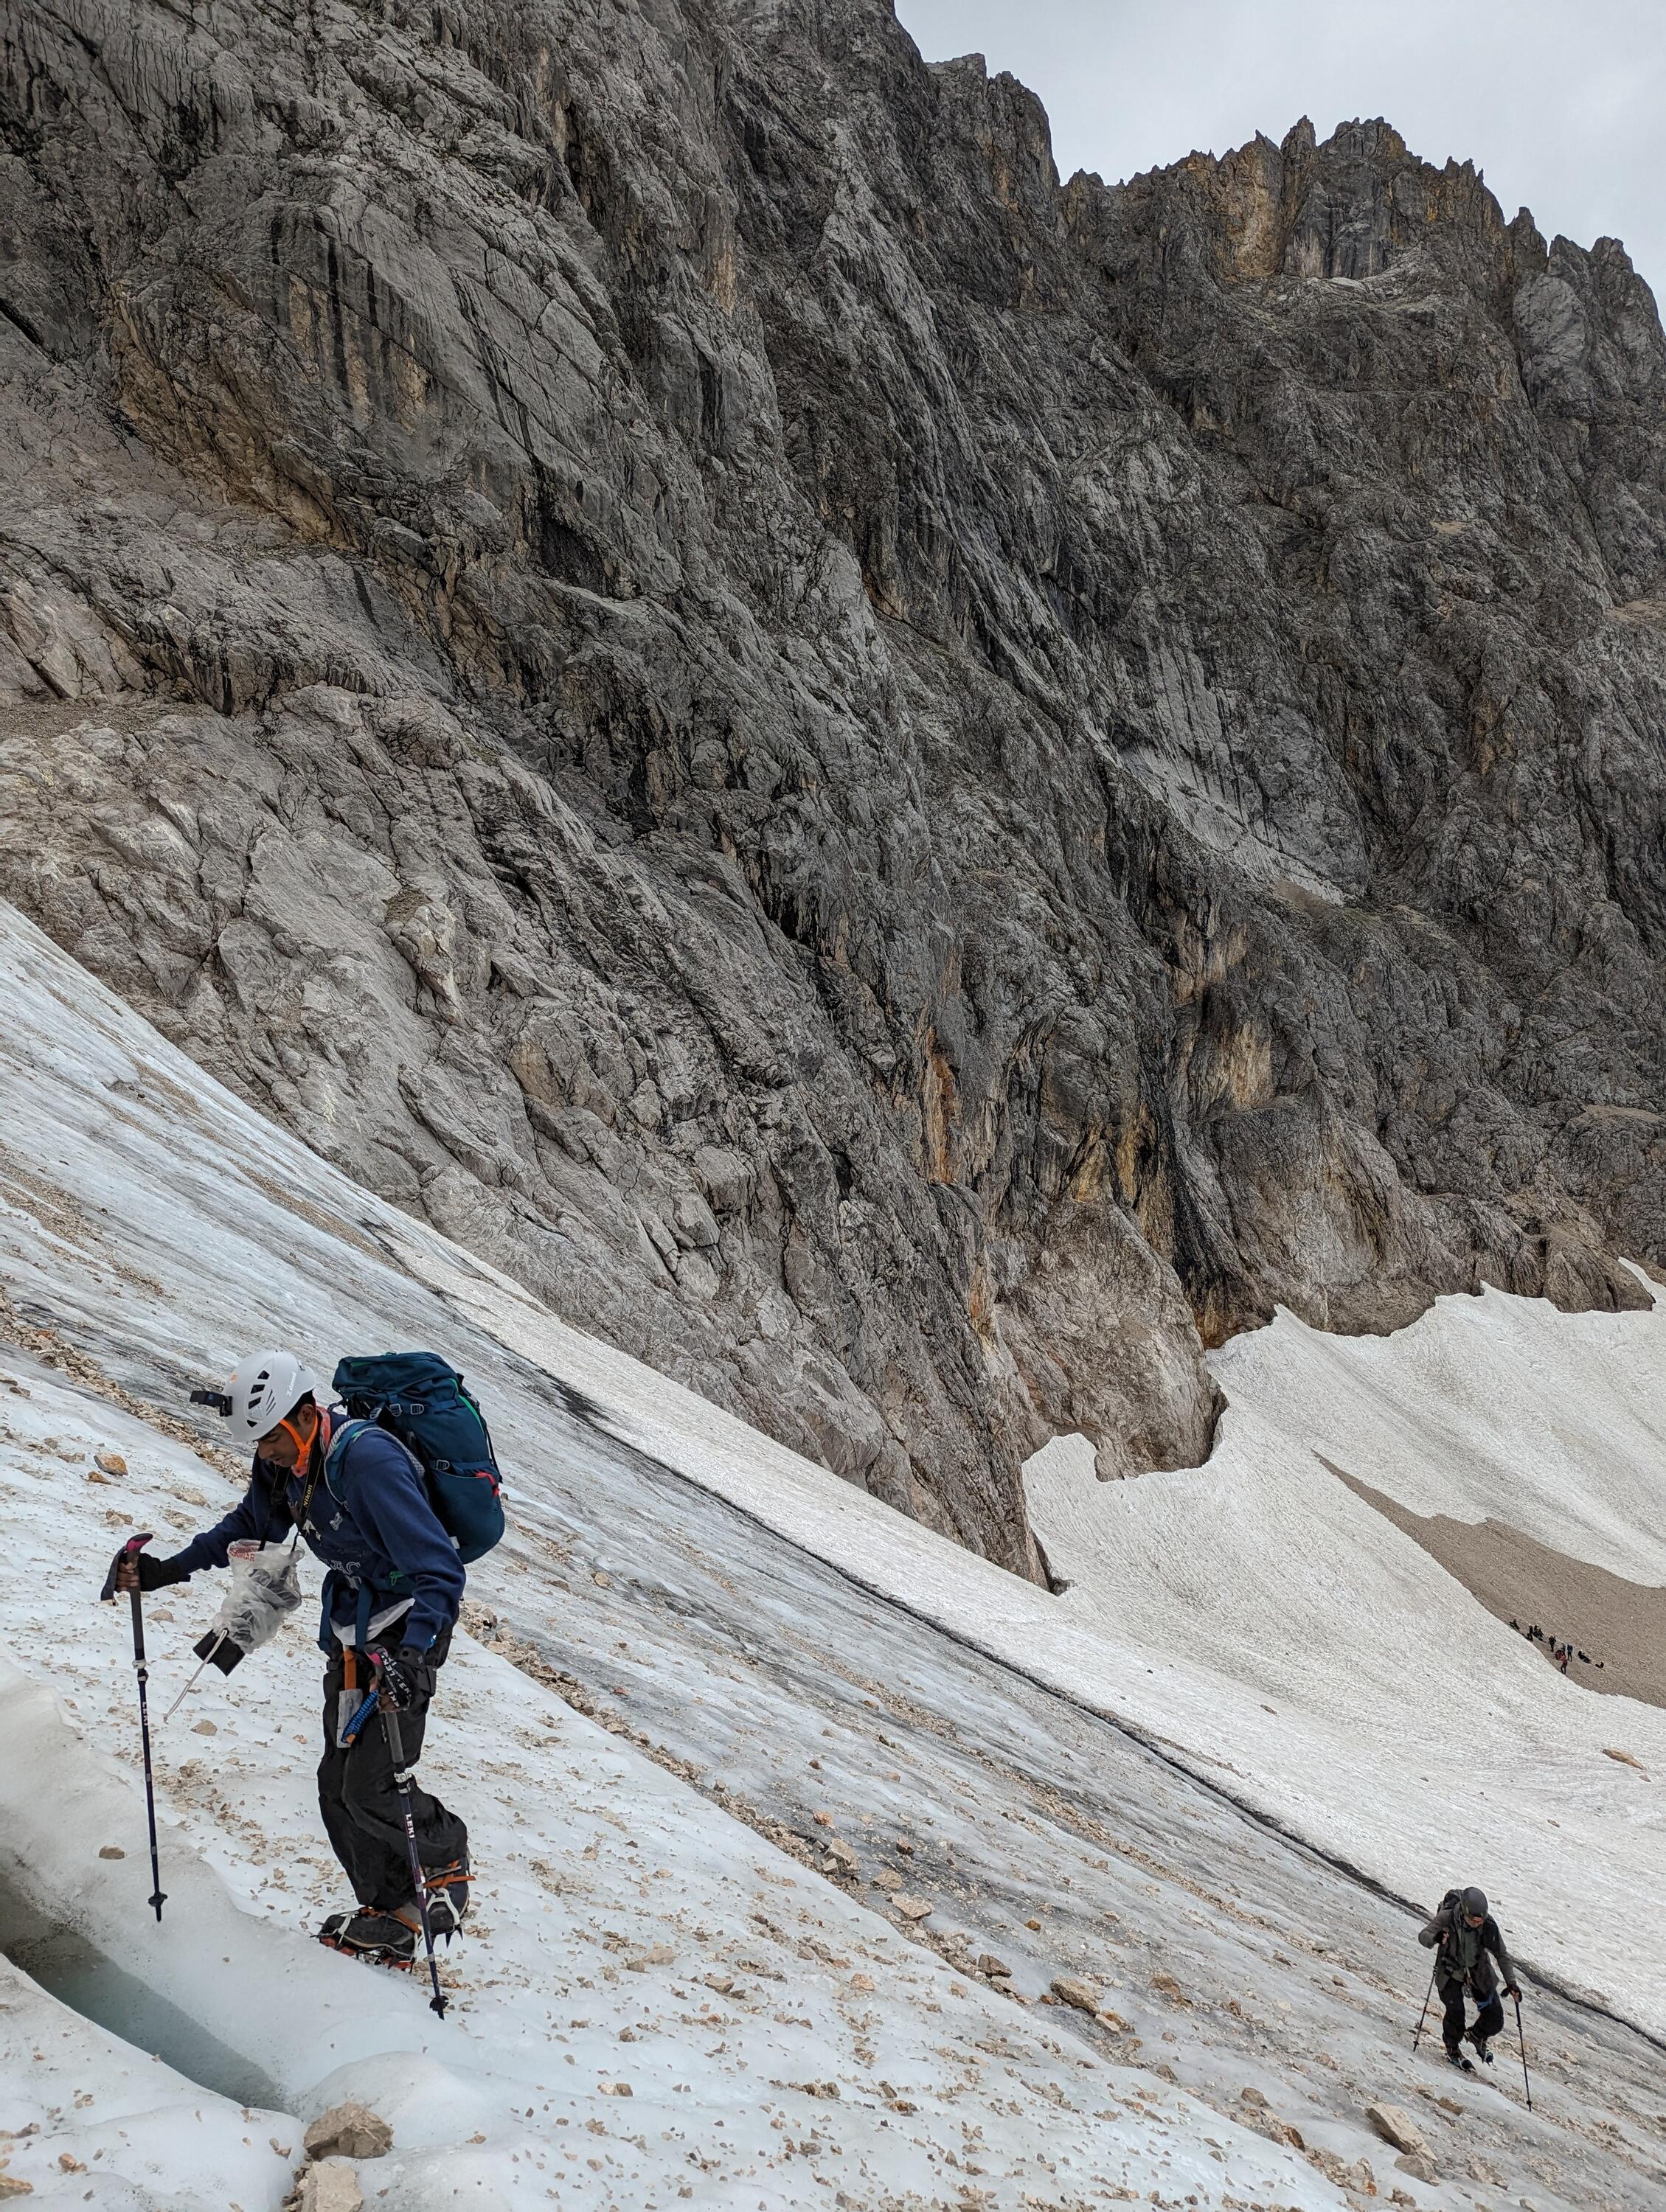 Two people climbing the side of an icy mountain.